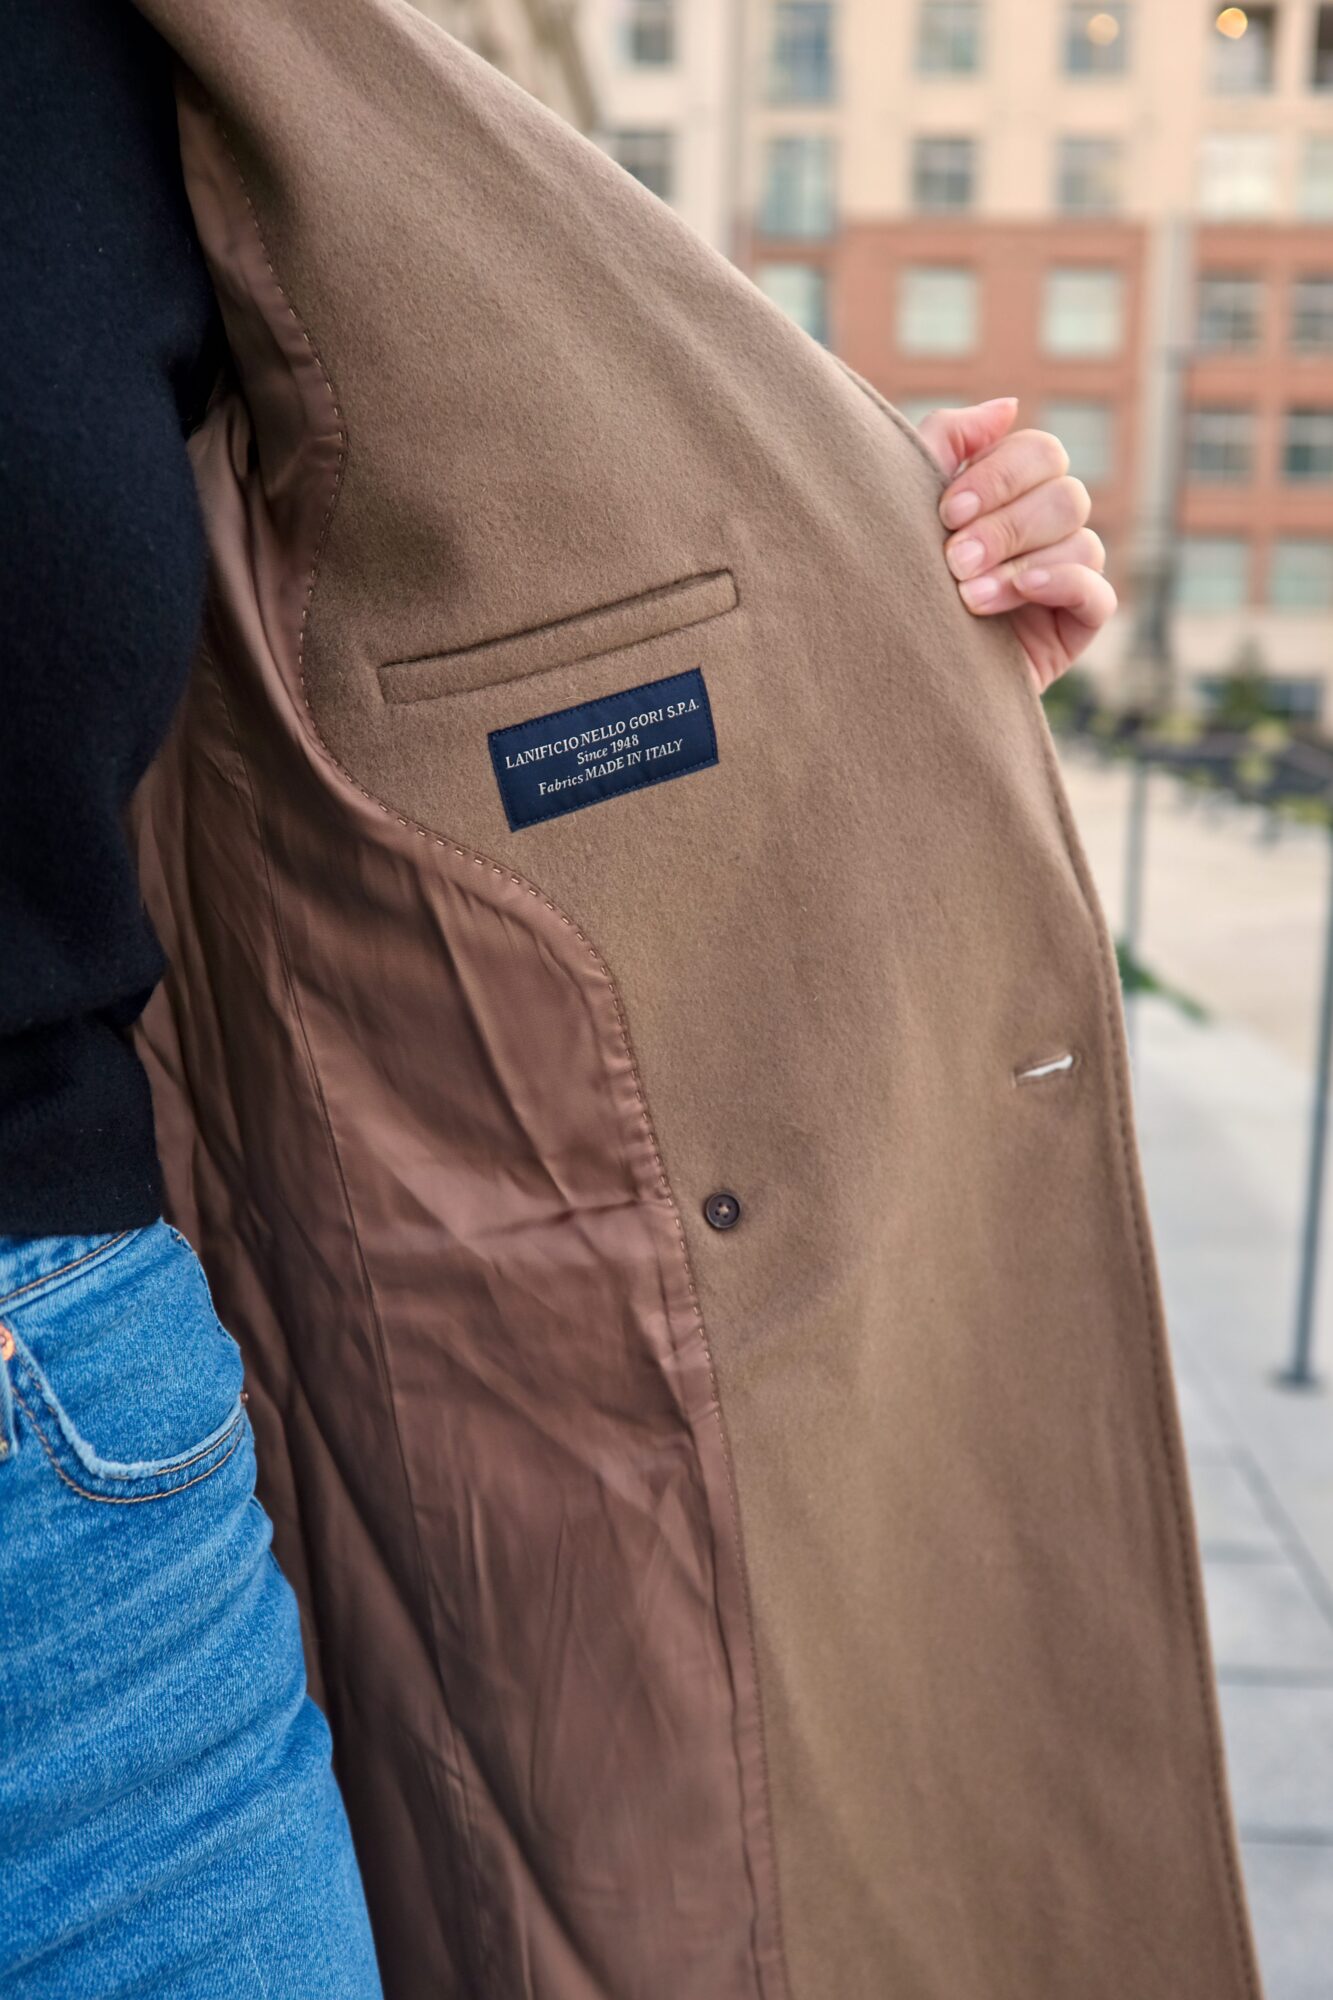 Alyssa shows the interior of the coat with a label indicating the fabric is from Italy